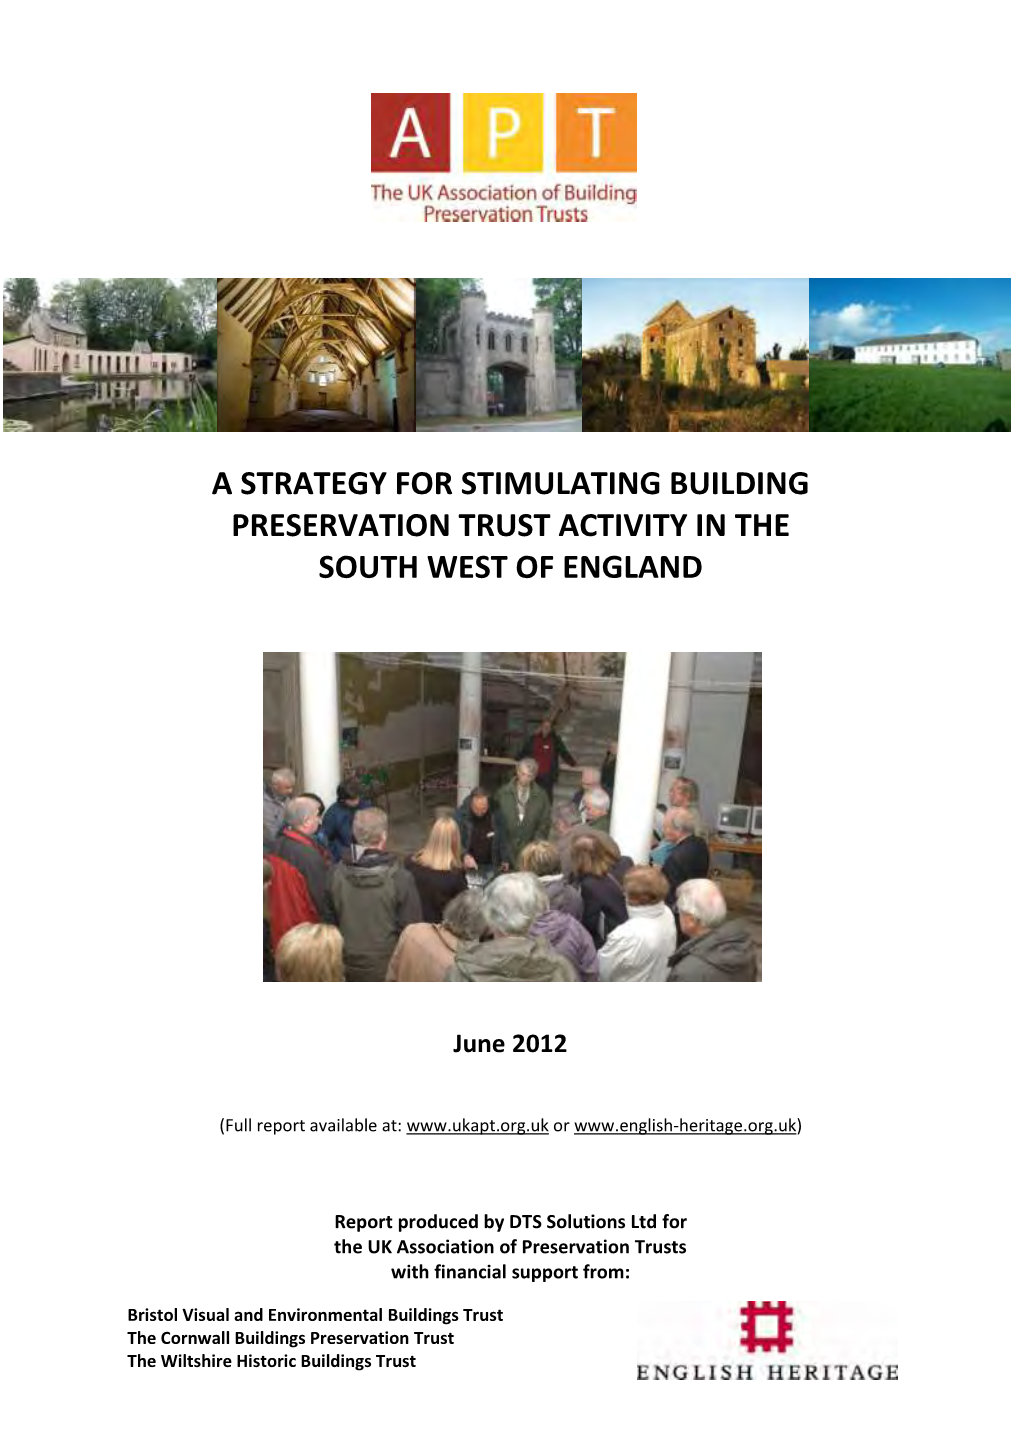 A Strategy for Stimulating Building Preservation Trust Activity in the South West of England